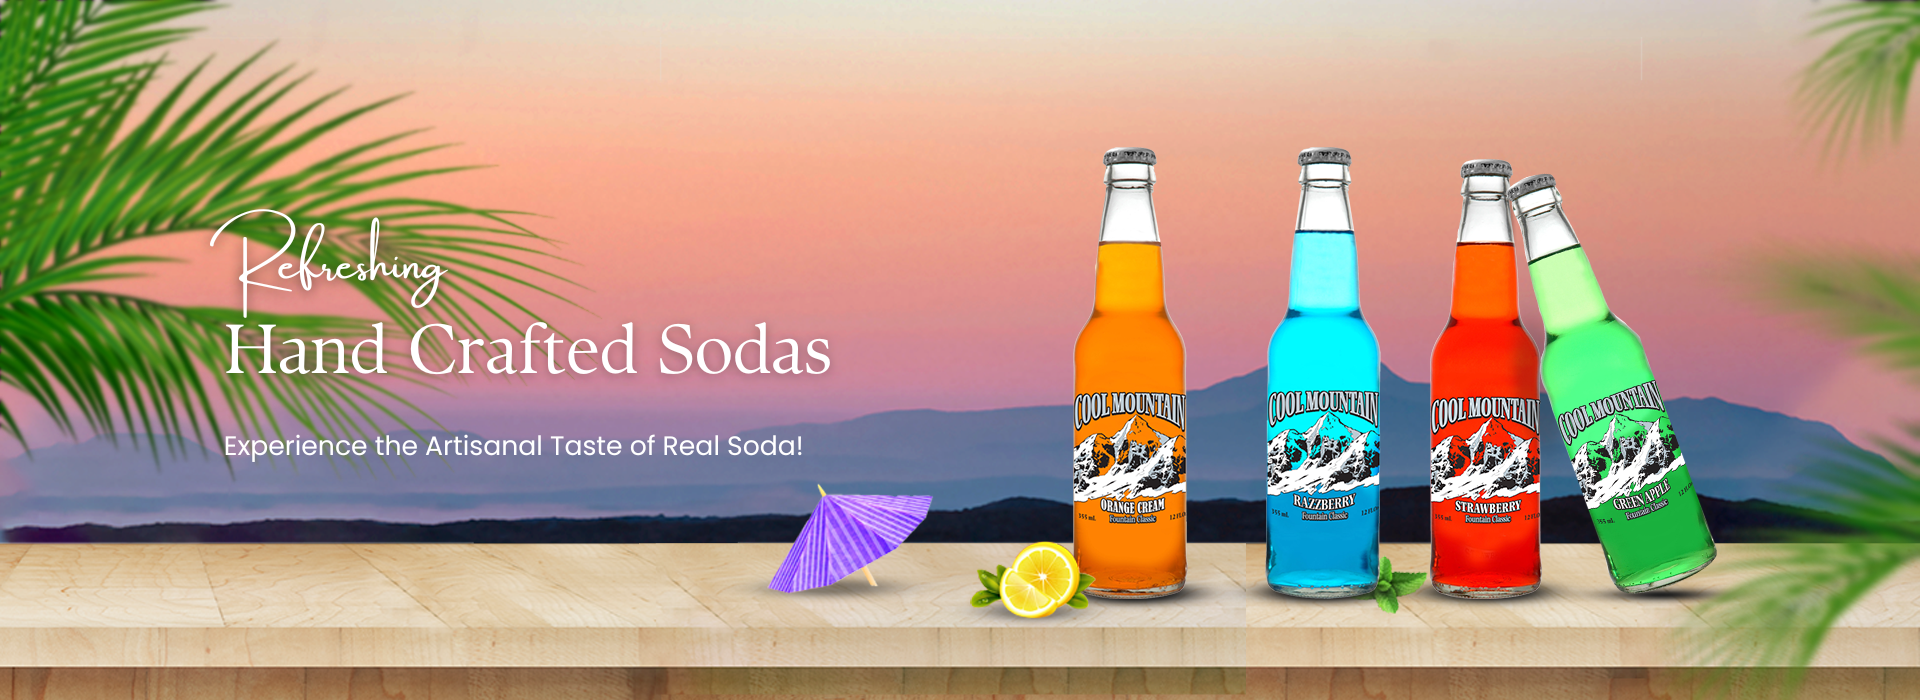 #1Soda Retailers in USA: Beverages, Handcrafted Flavored Sodas